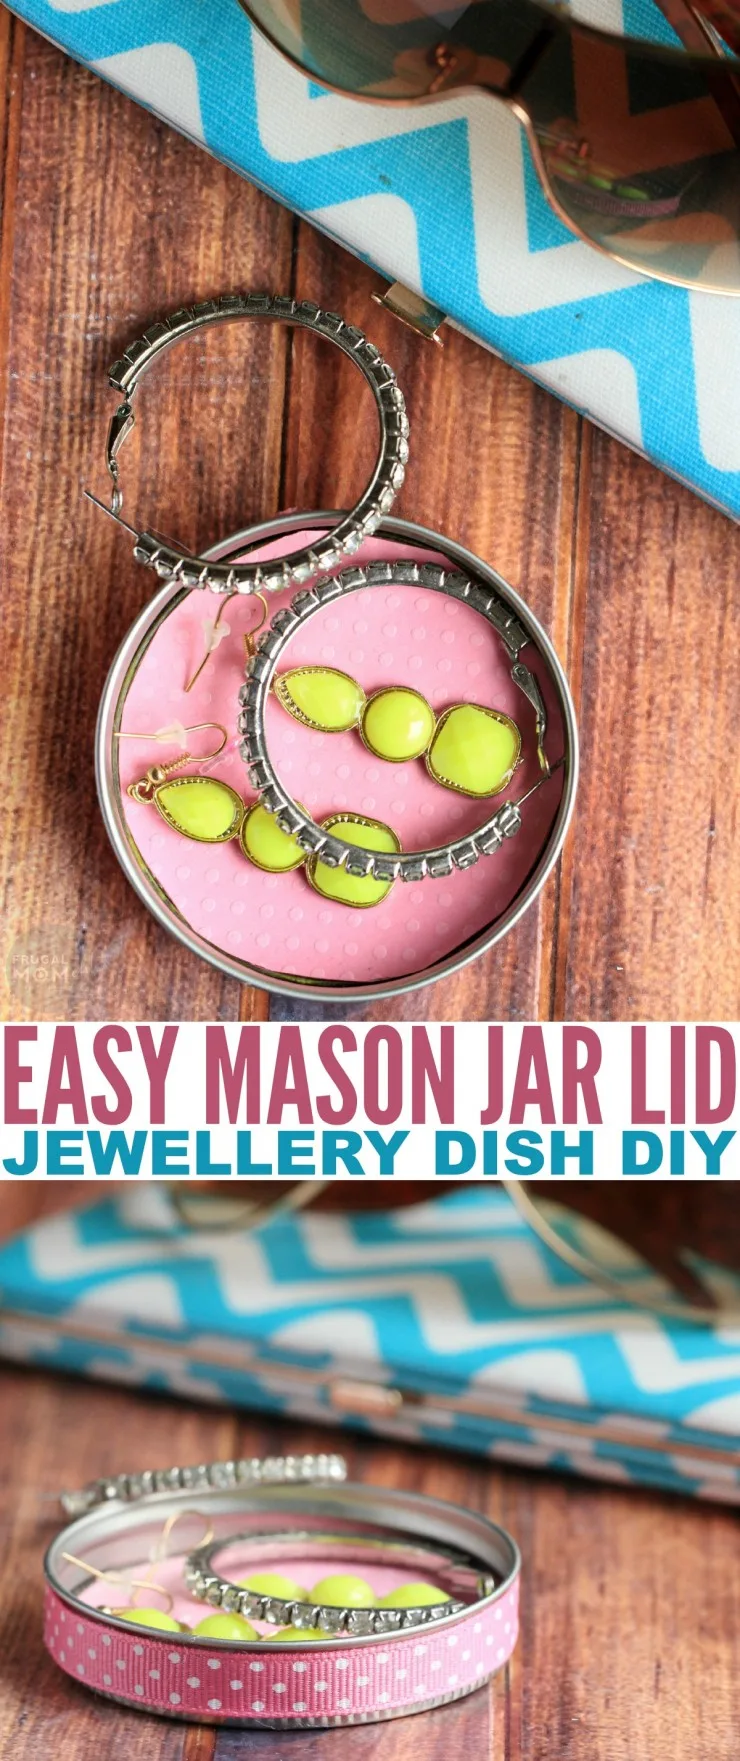 This Easy Mason Jar Lid Jewelry Dish DIY is a fun craft for kids to make for a simple but useful mother's day gift on a budget.